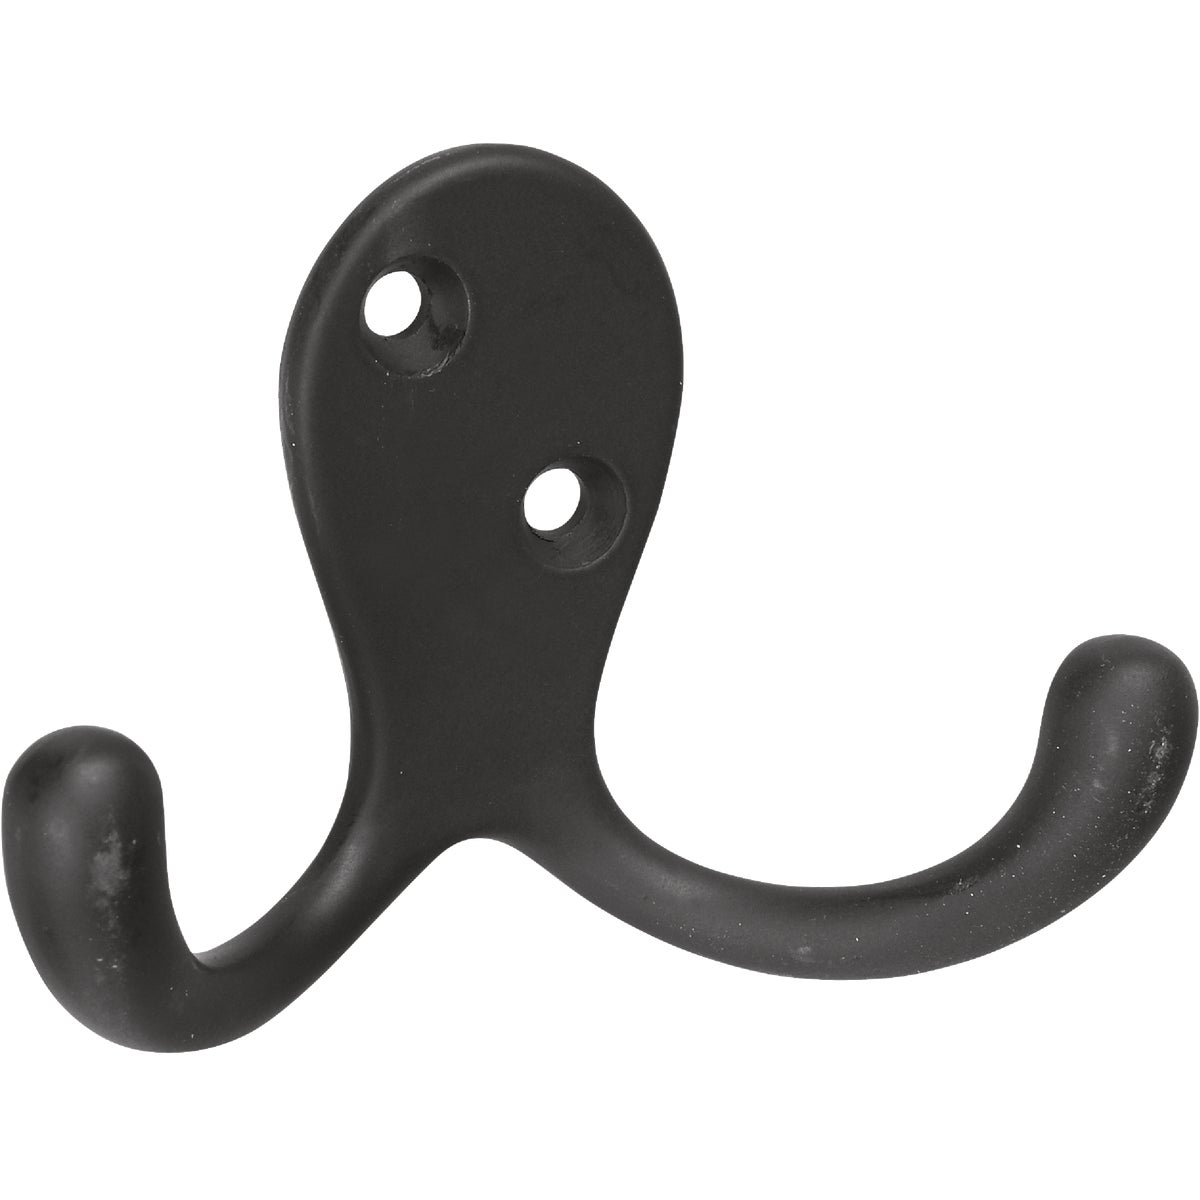 National Oil Rubbed Bronze Double Clothes Hook